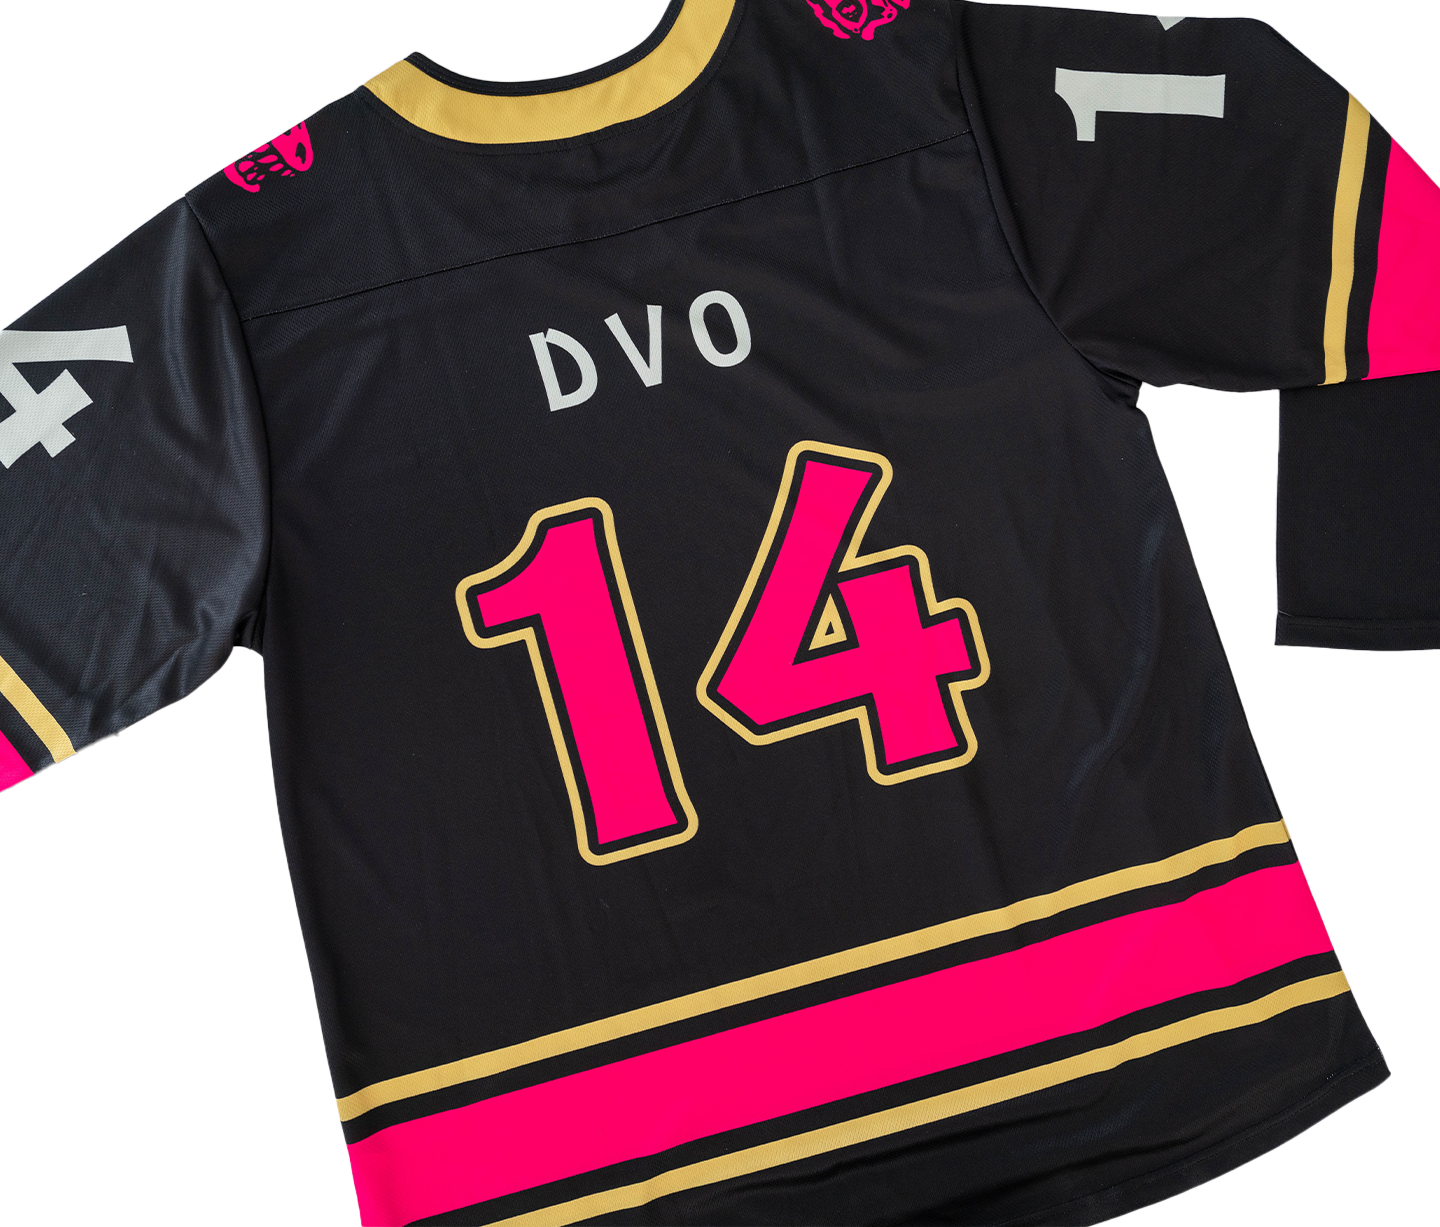 Dinoco Strip 'The King' Weathers Lace-Up Hockey Jersey Adult Large